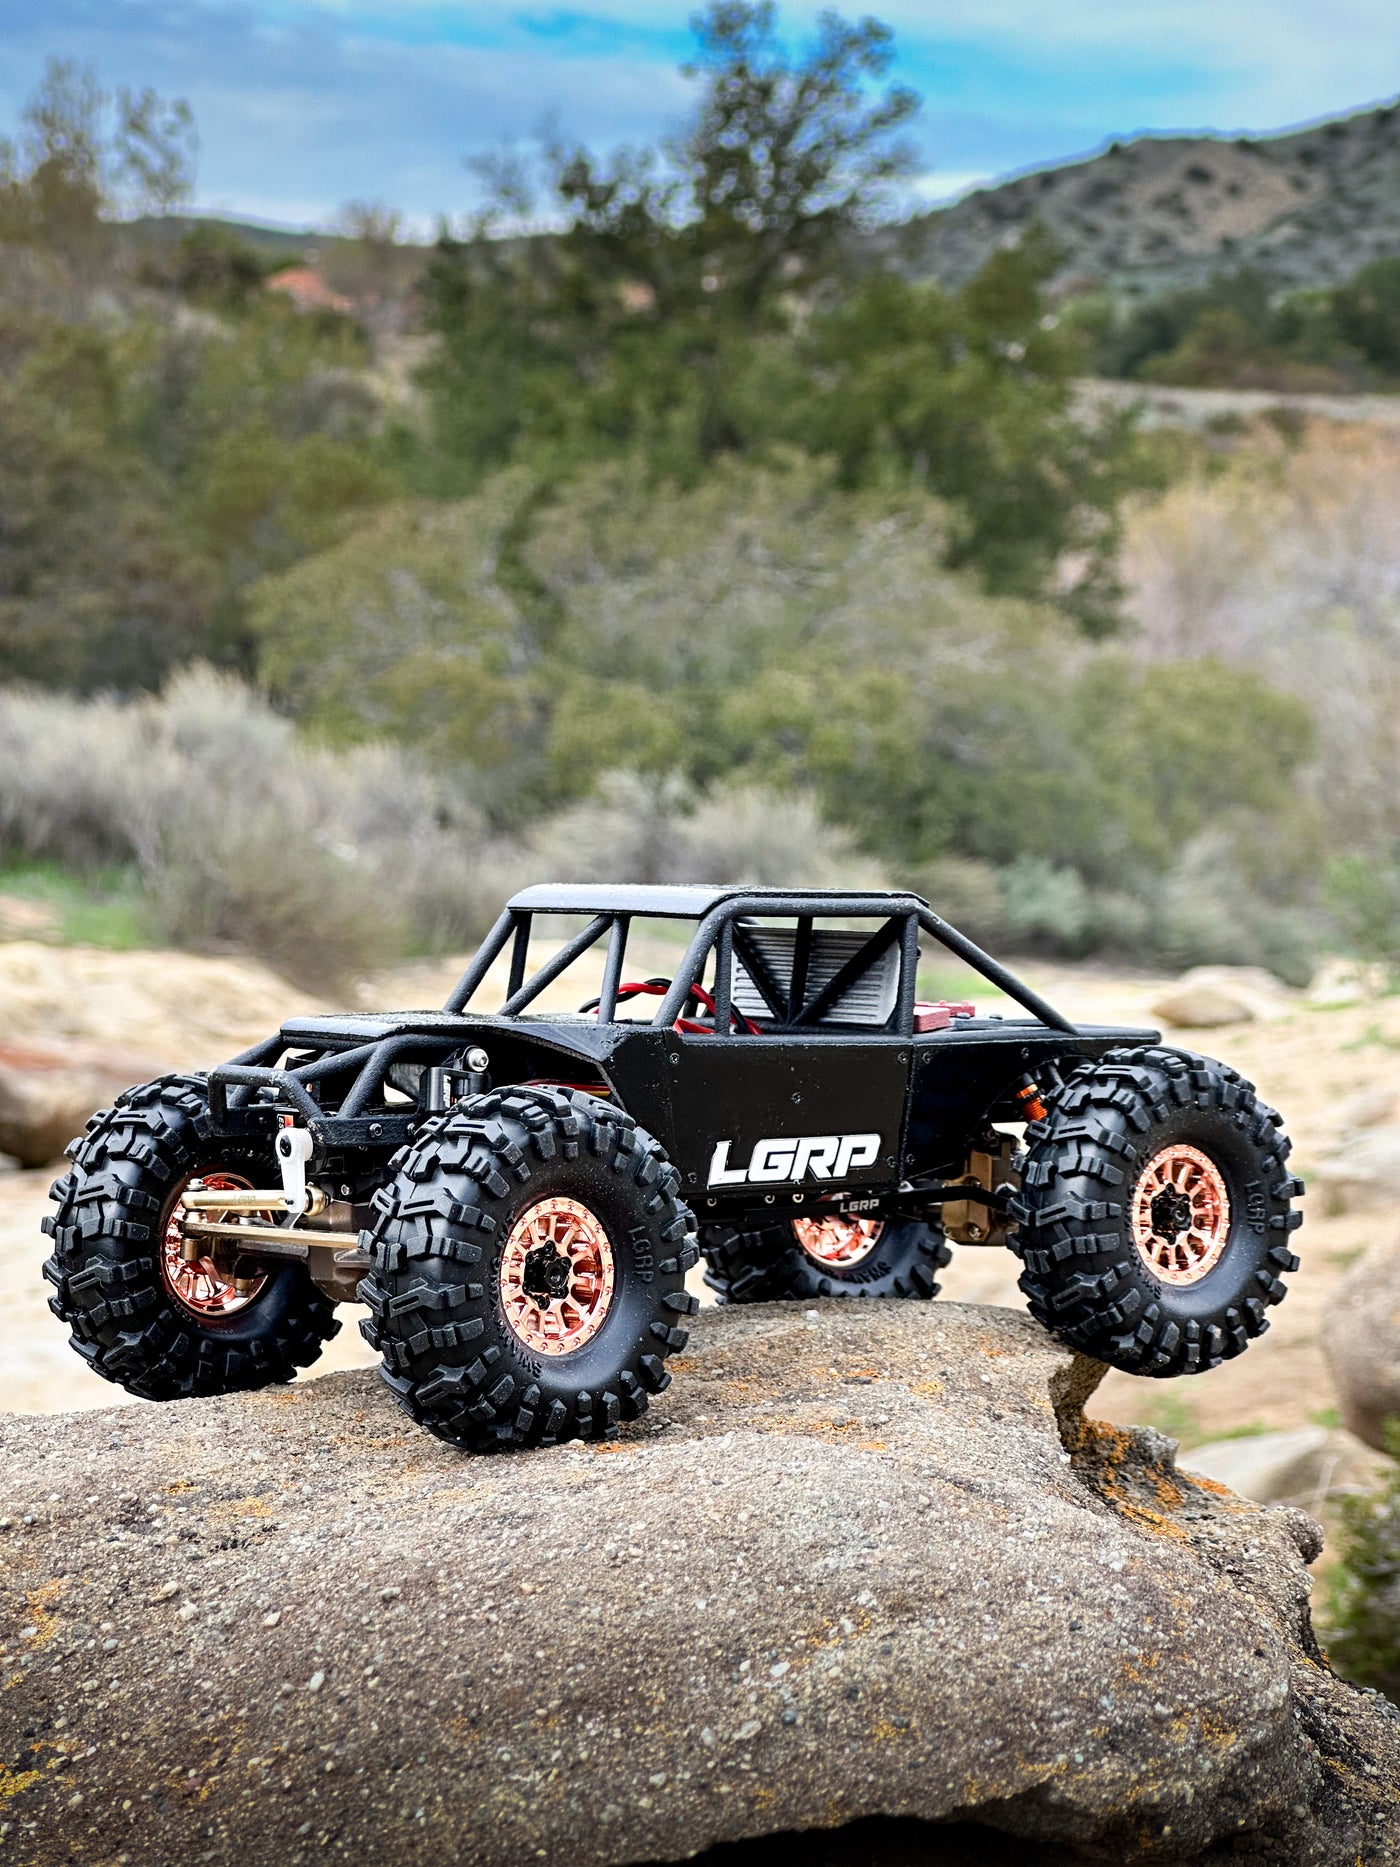 TRX4M™ ALL-IN-ONE BEARING KIT – Little Guy Racing Parts